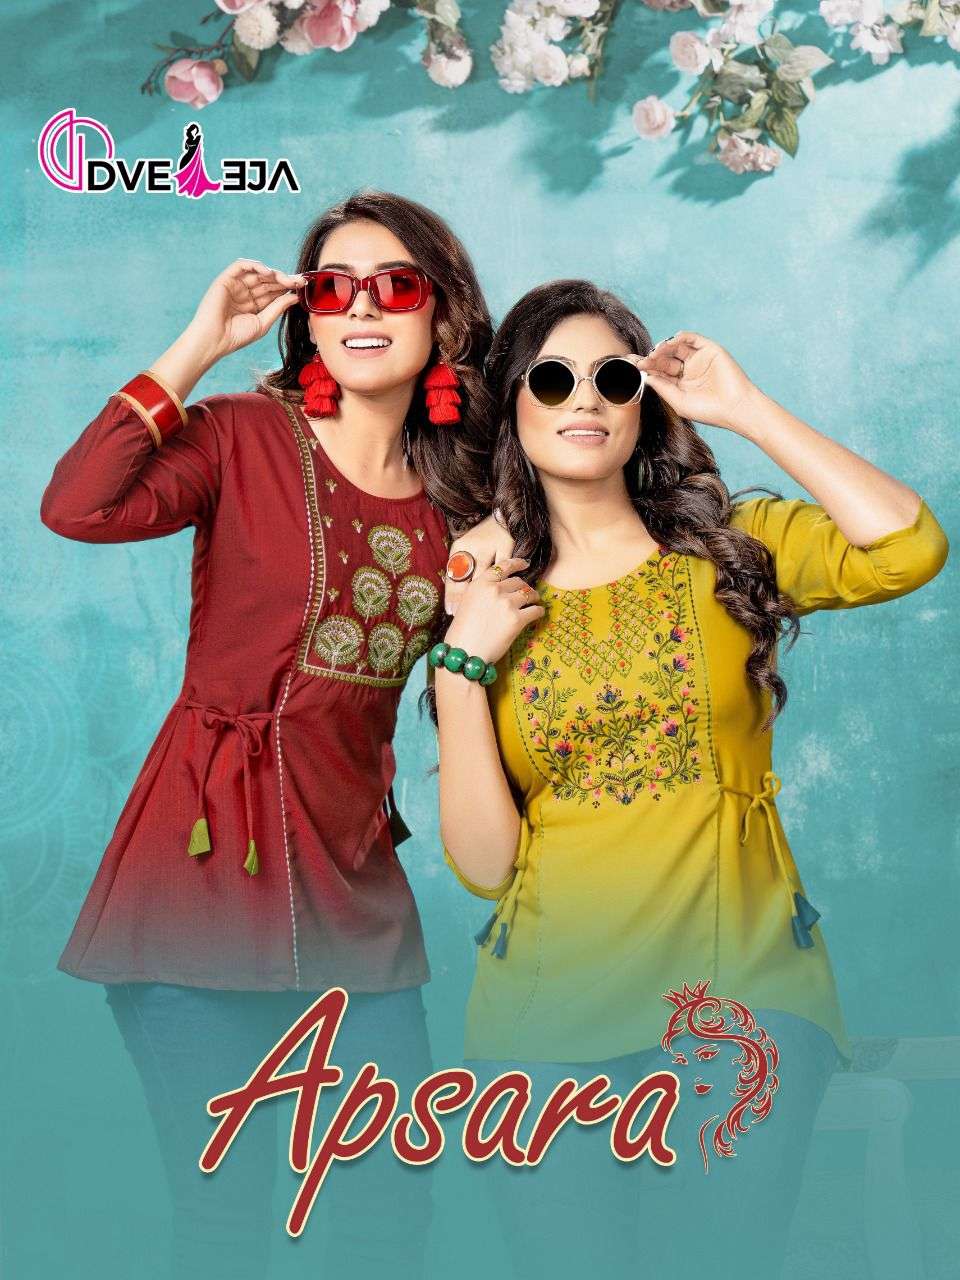 Dveeja Apsara vol 1 Rayon with Embroidery work Fancy Short t...